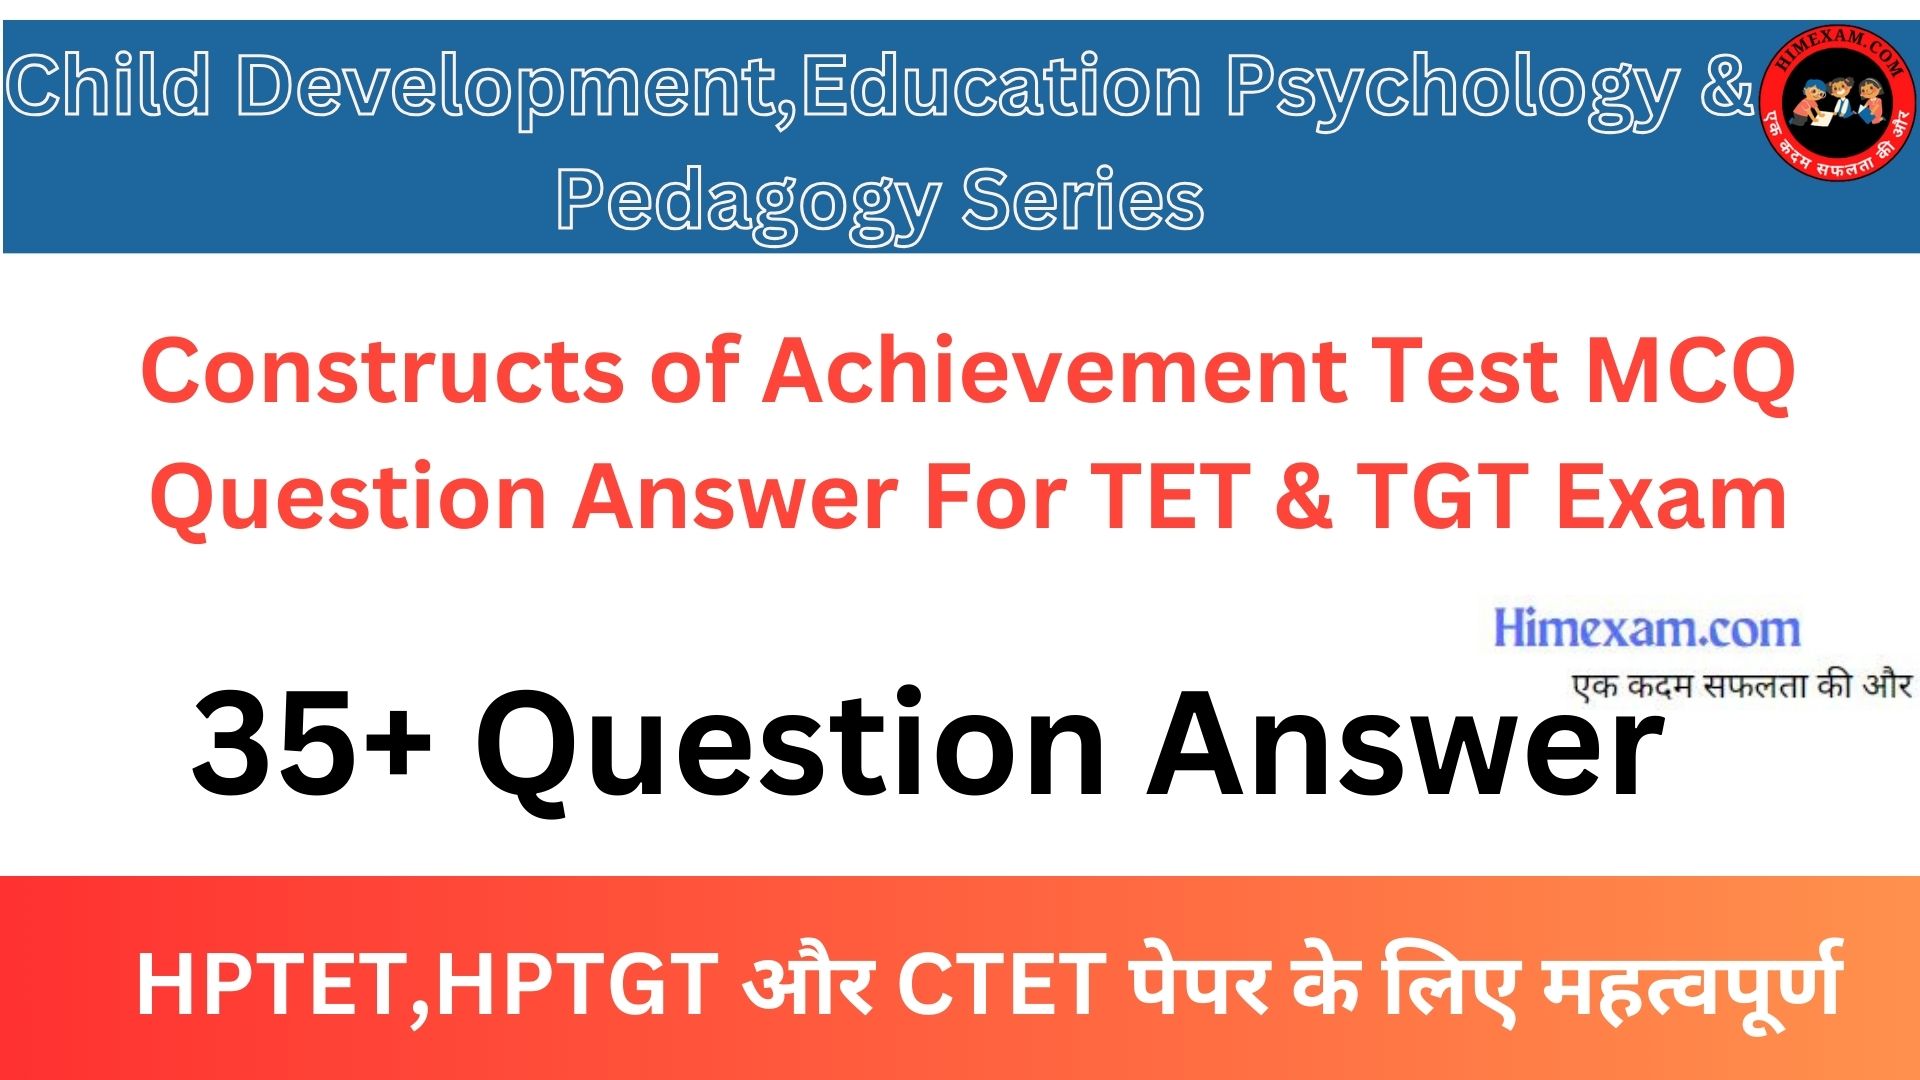 Constructs of Achievement Test MCQ Question Answer For TET & TGT Exam